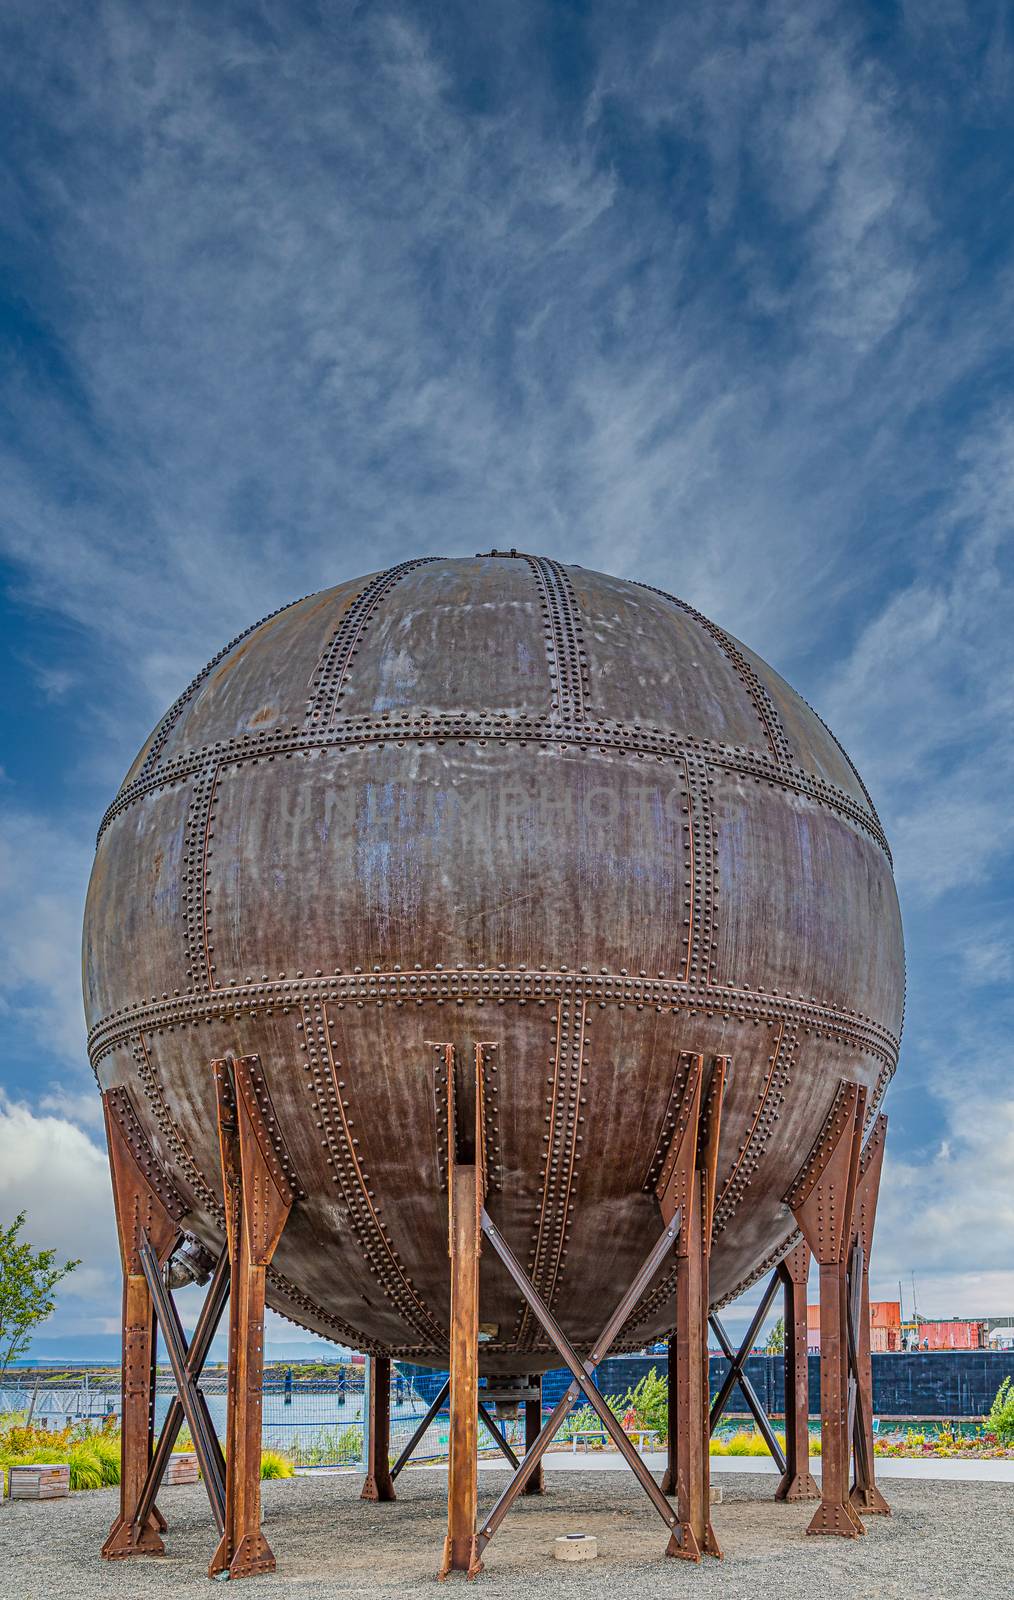 Round Rusty Tank with Rivets on Sky by dbvirago